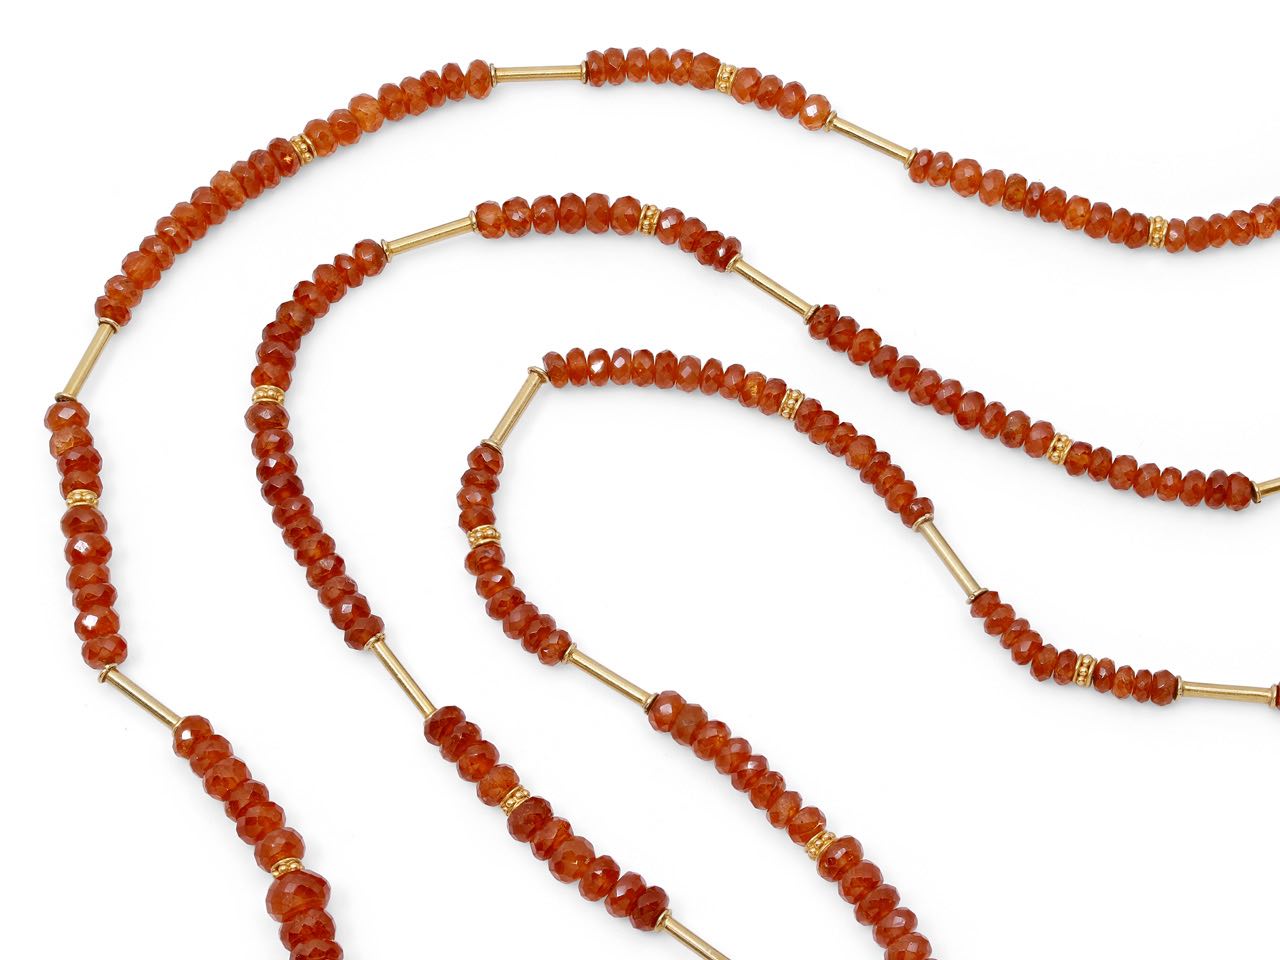 Three Strand Amber Bead Necklace in 18K Gold